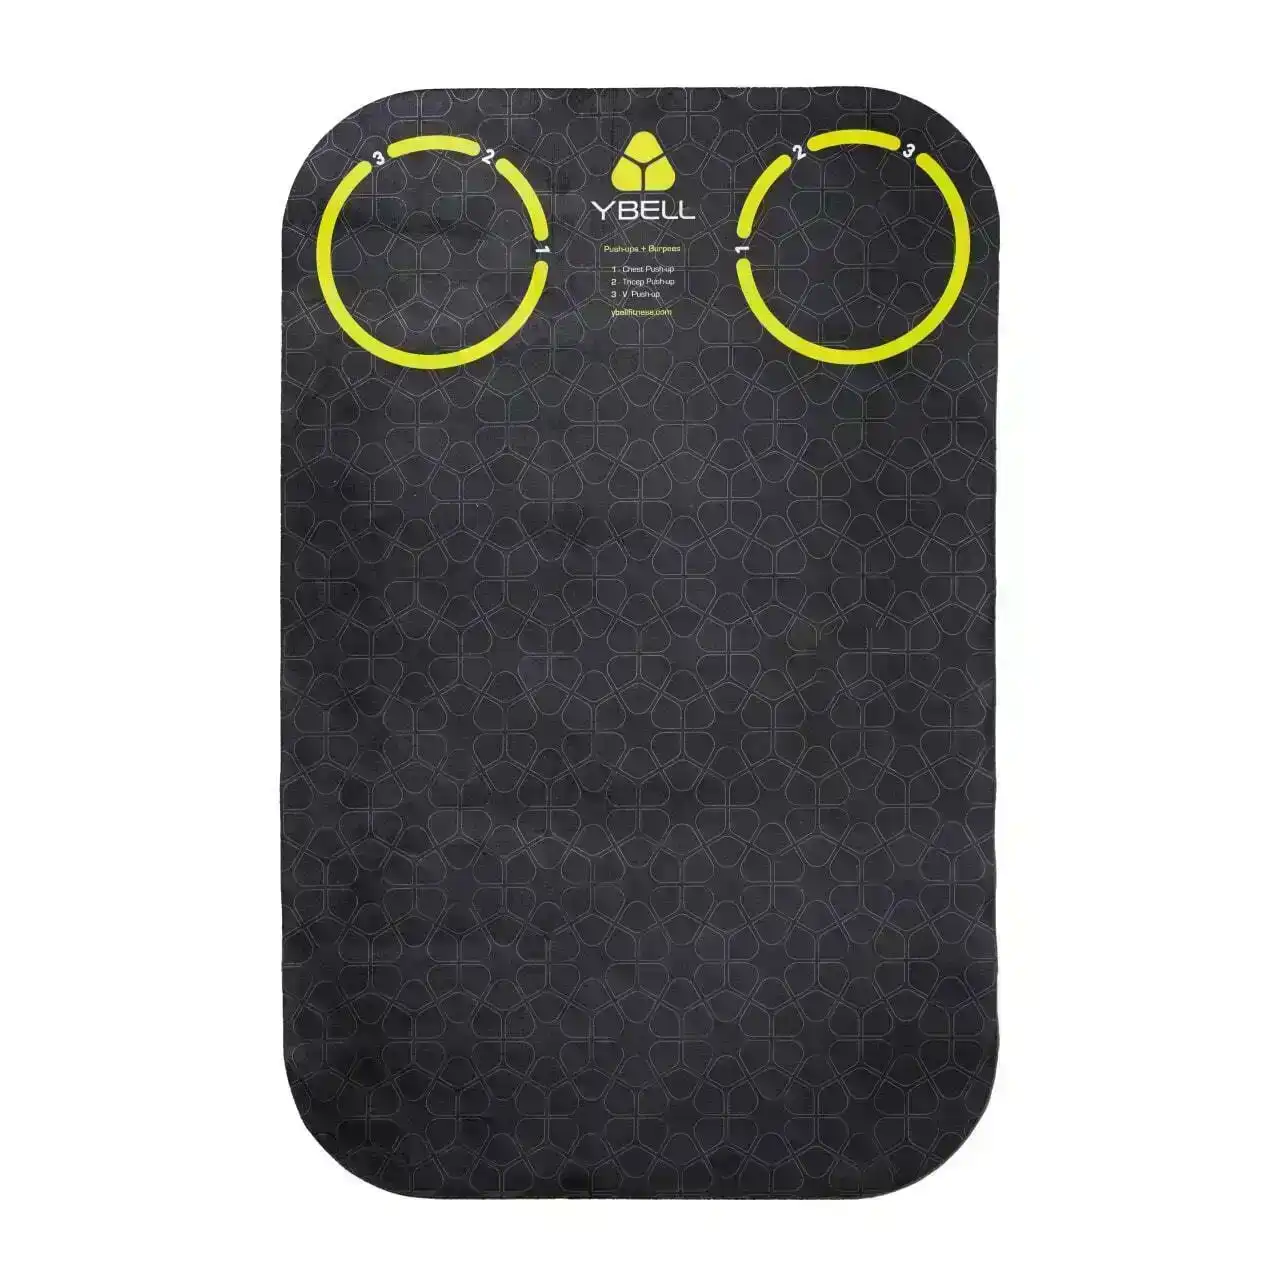 YBell 111cm Exercise Mat Workout Home Gym Fitness Yoga/HIIT Non-Slip Pad Black